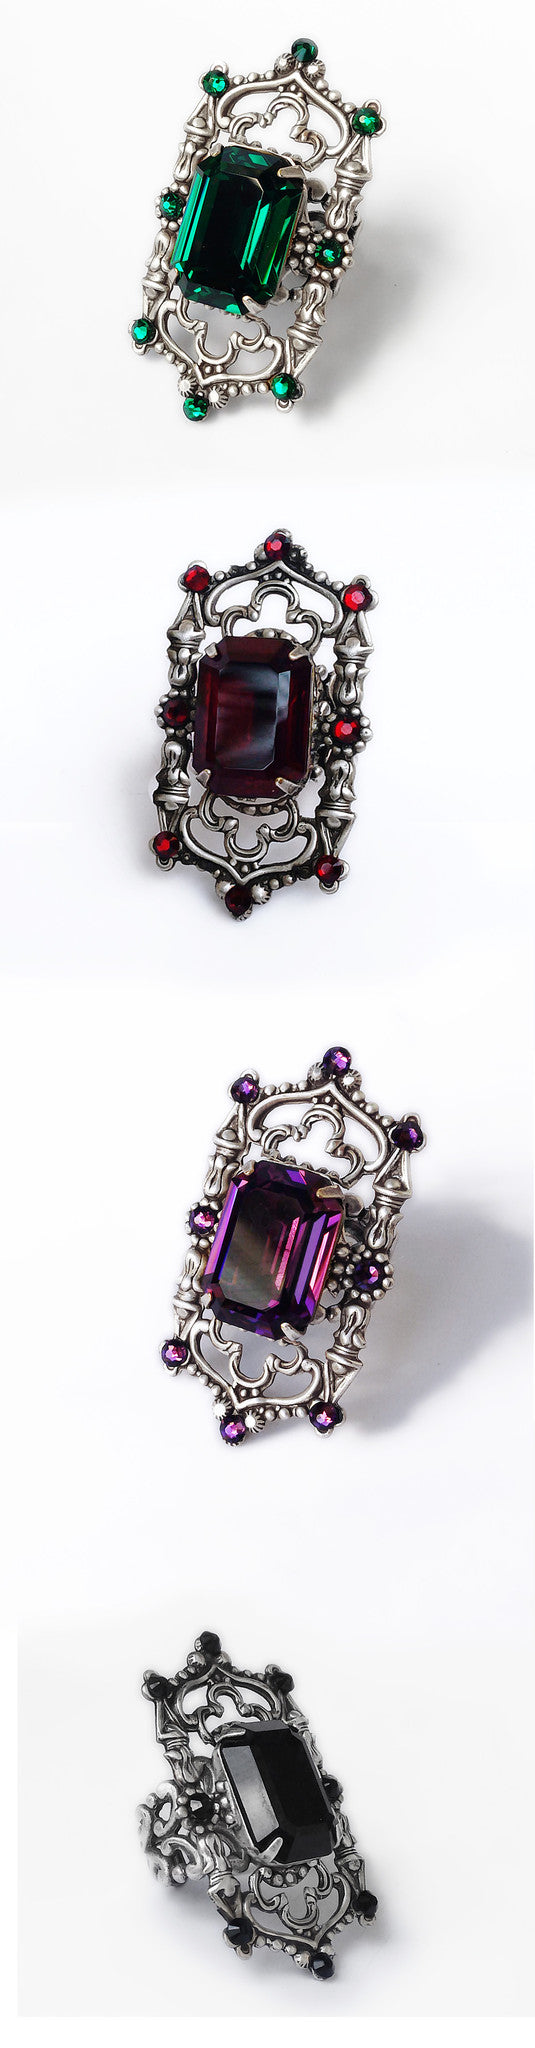 Gothic Cathedral Pendant - Aranwen's Jewelry
 - 5